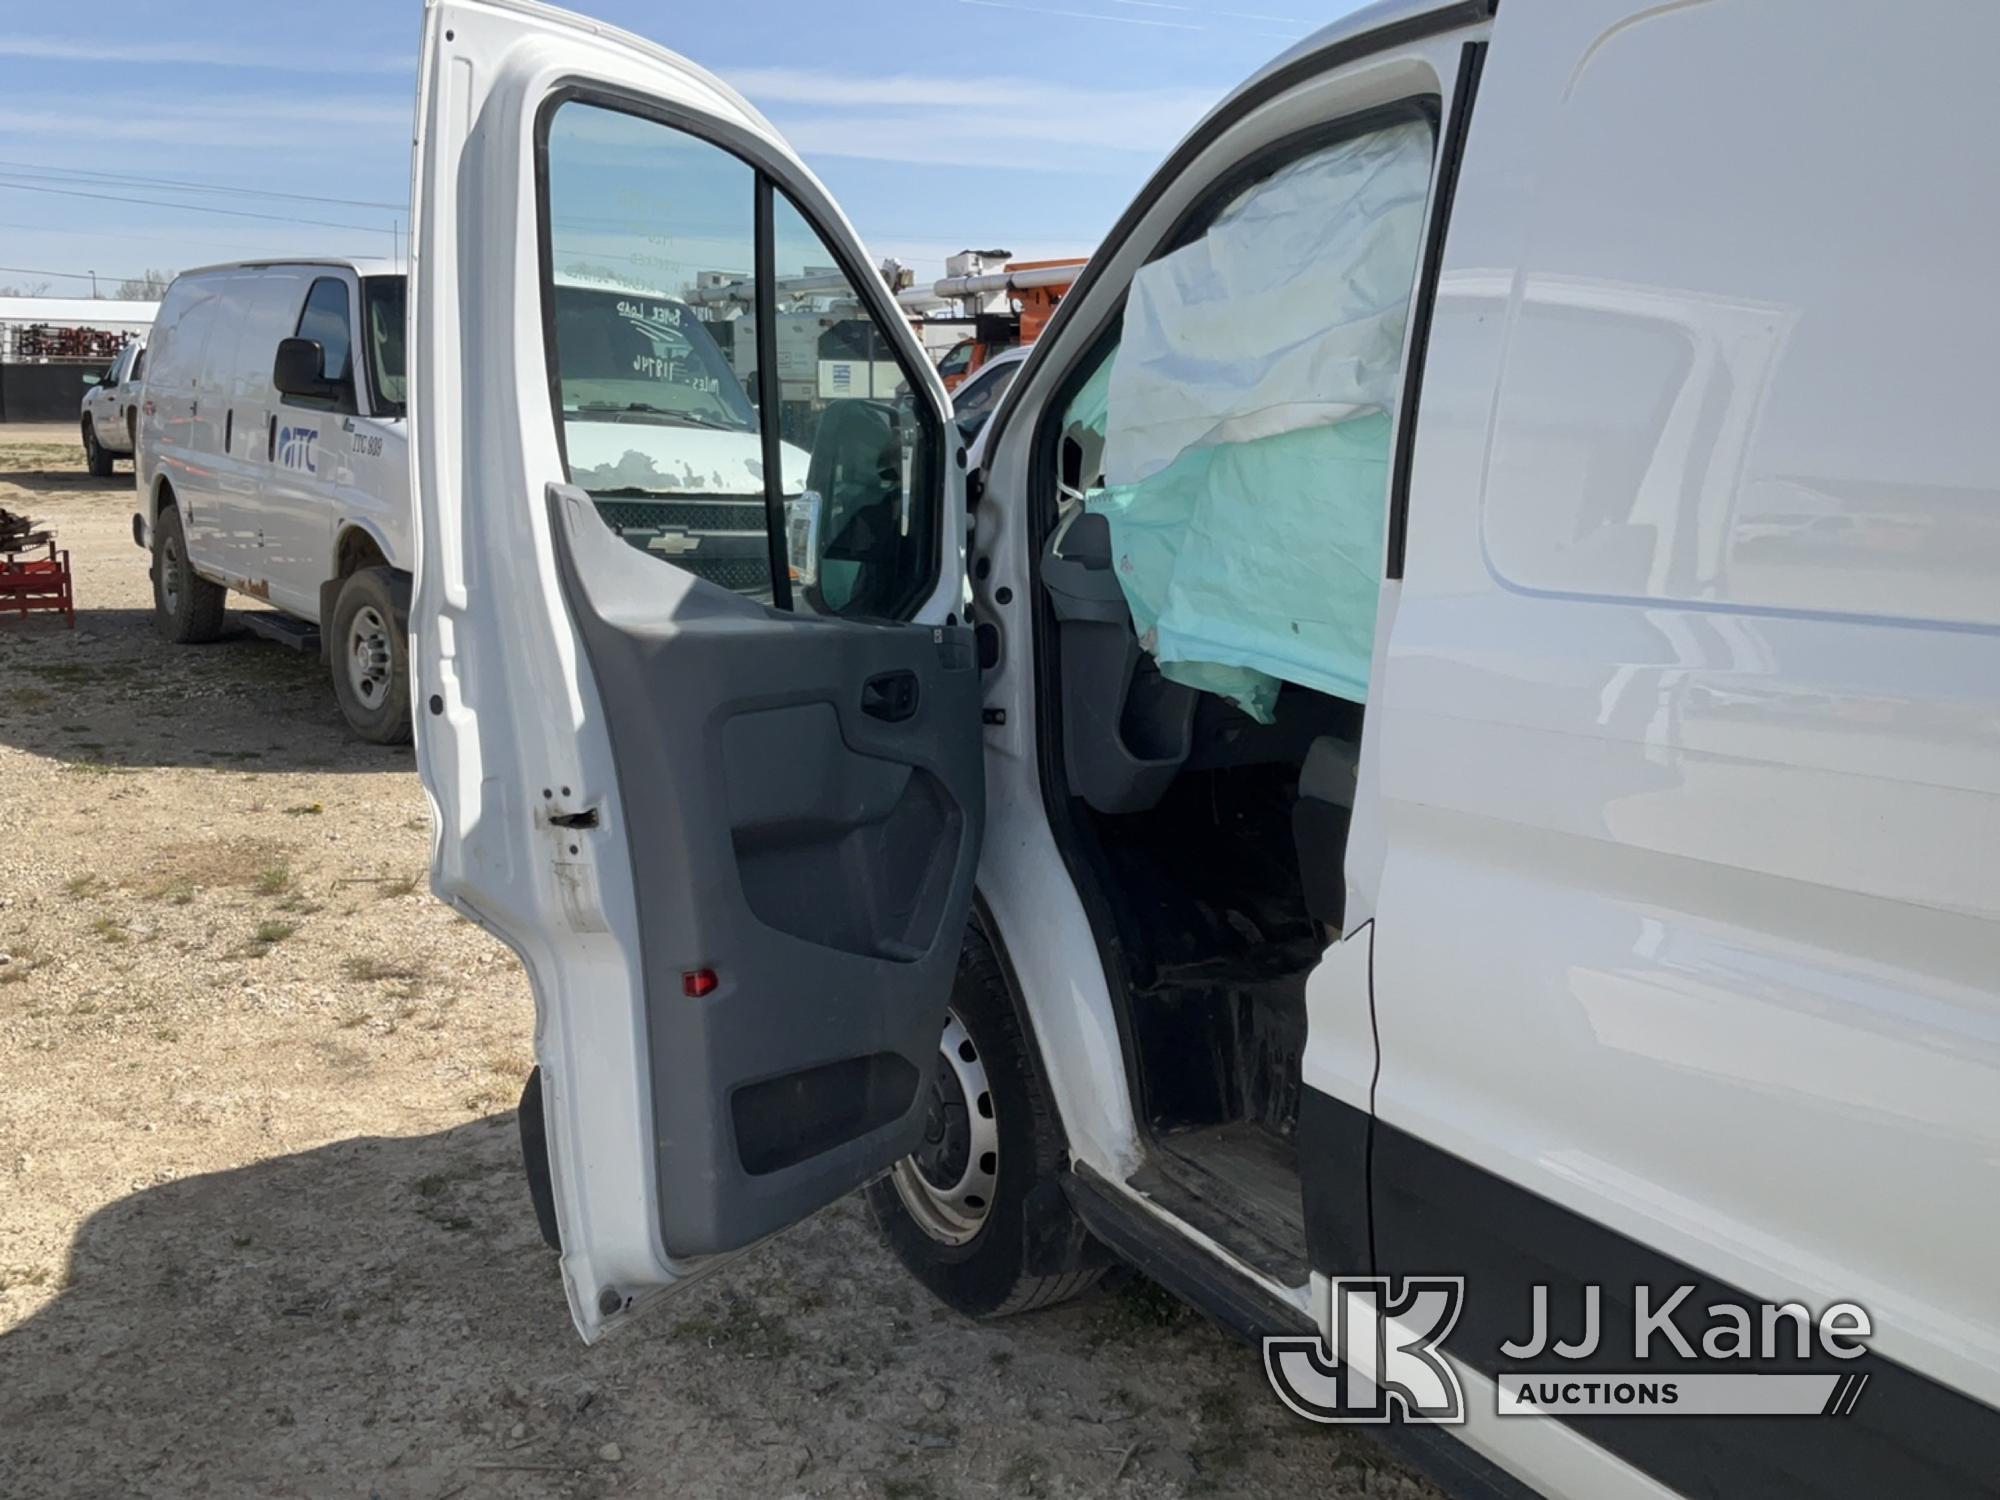 (Charlotte, MI) 2019 Ford Transit-250 Cargo Van Condition Unknown, Wrecked, All Airbags Deployed, BU